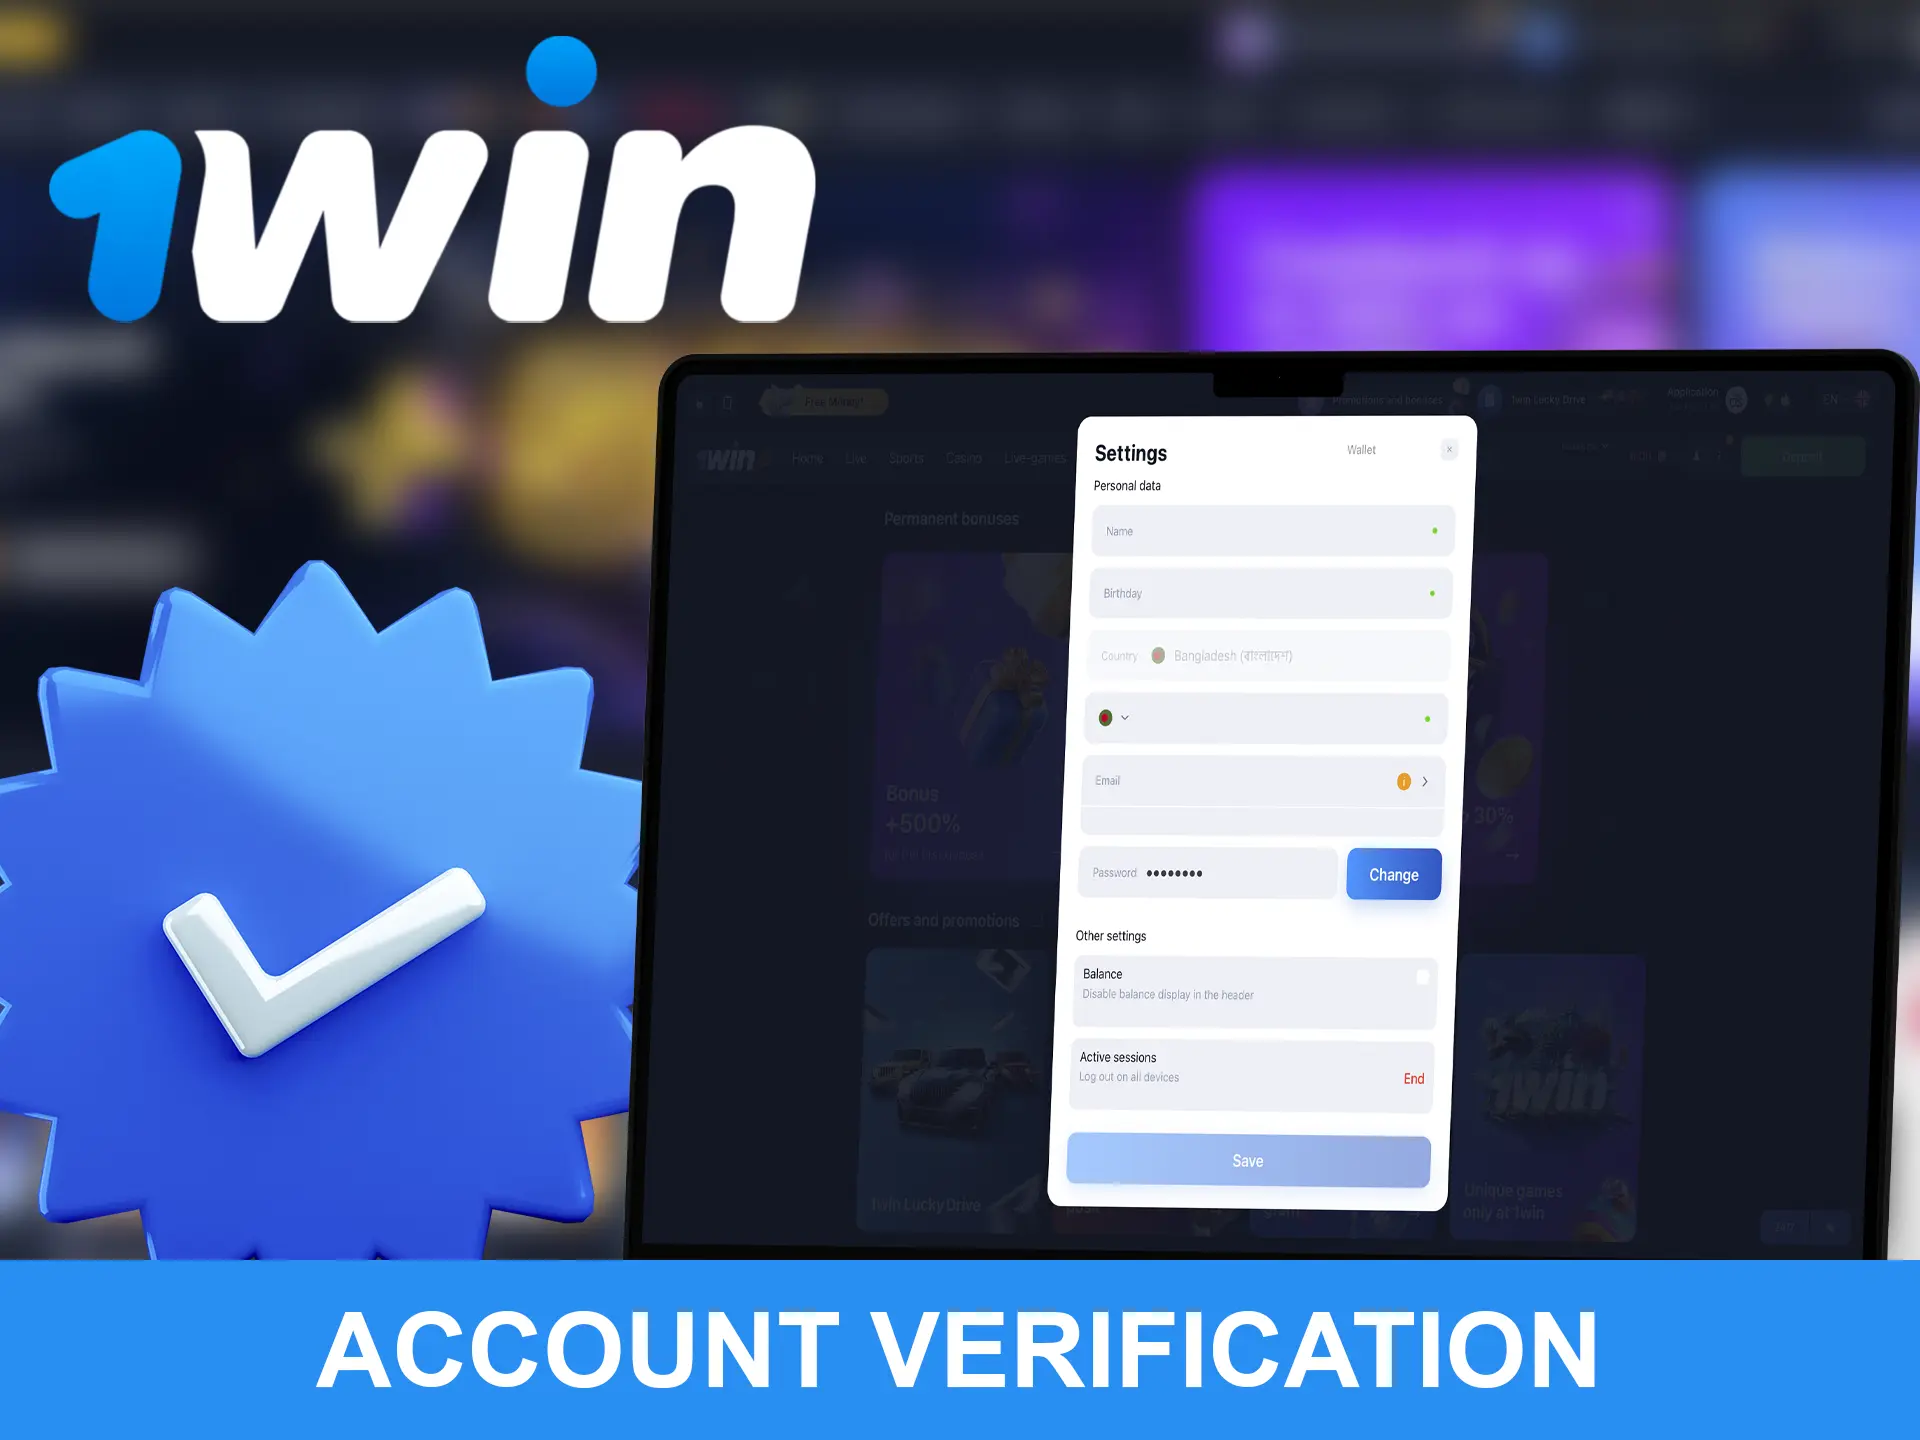 You can start betting after simple verification of your 1Win account.